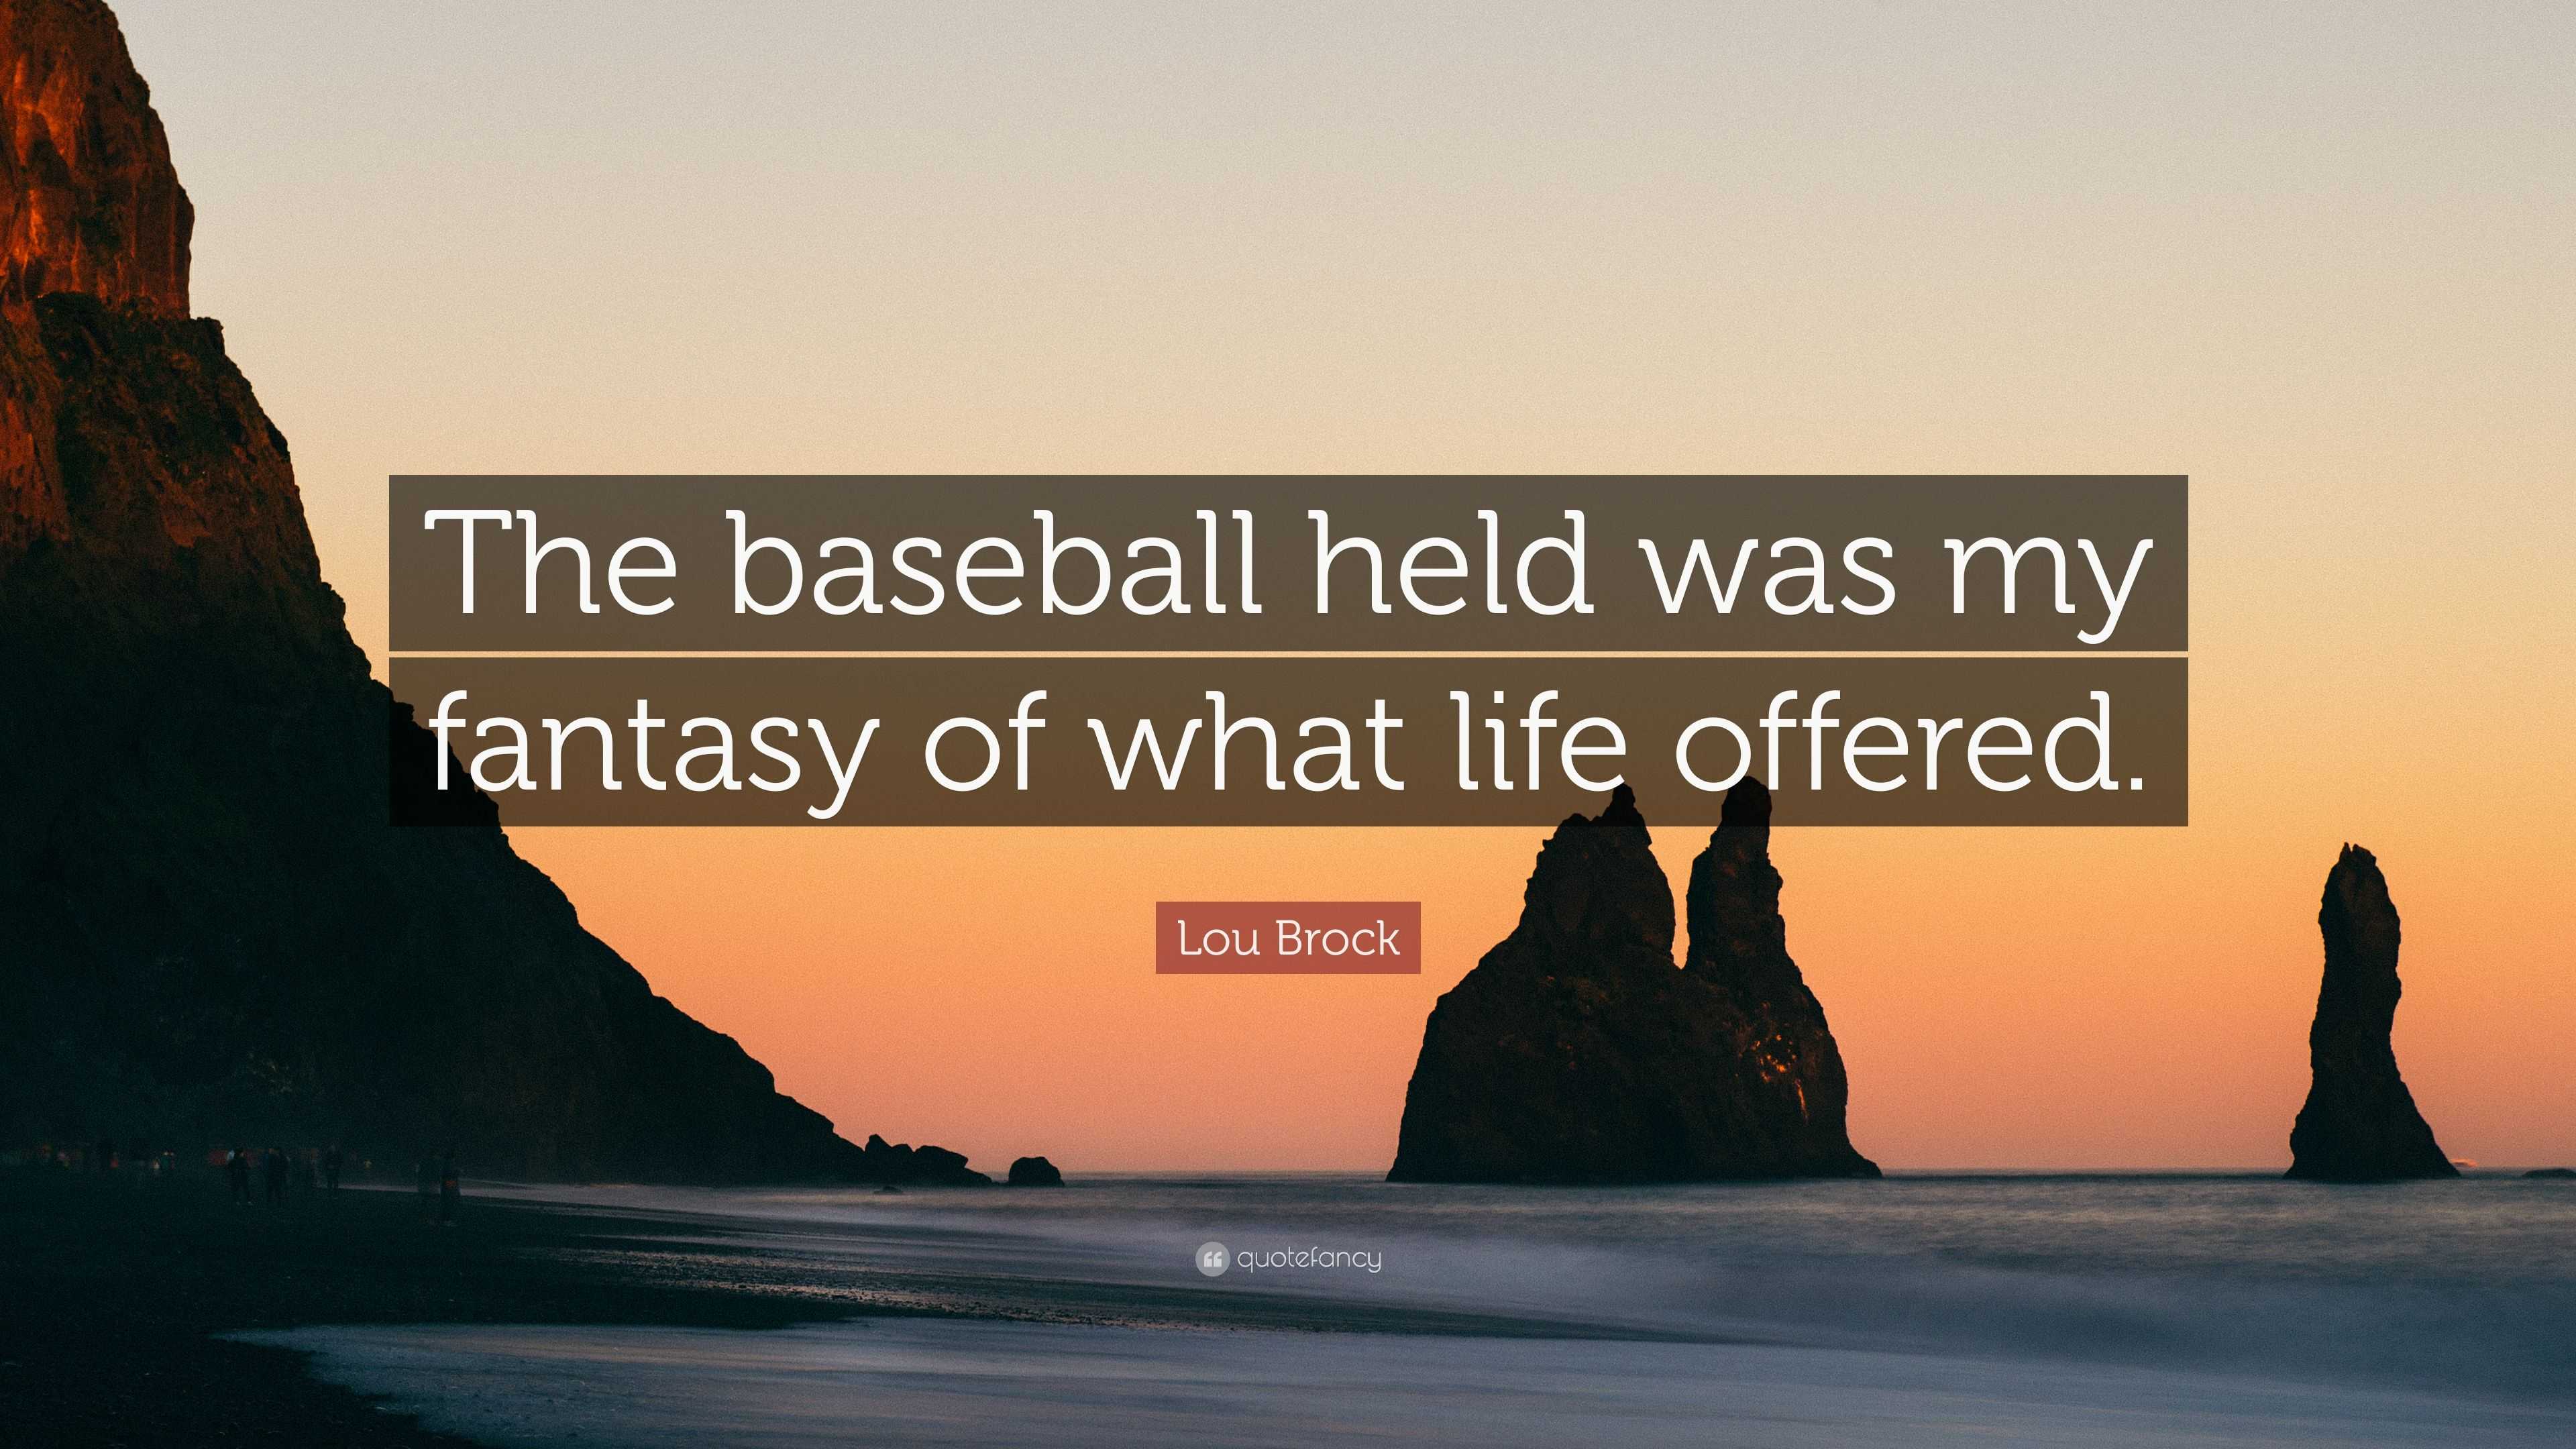 Lou Brock Quote: “The baseball held was my fantasy of what life